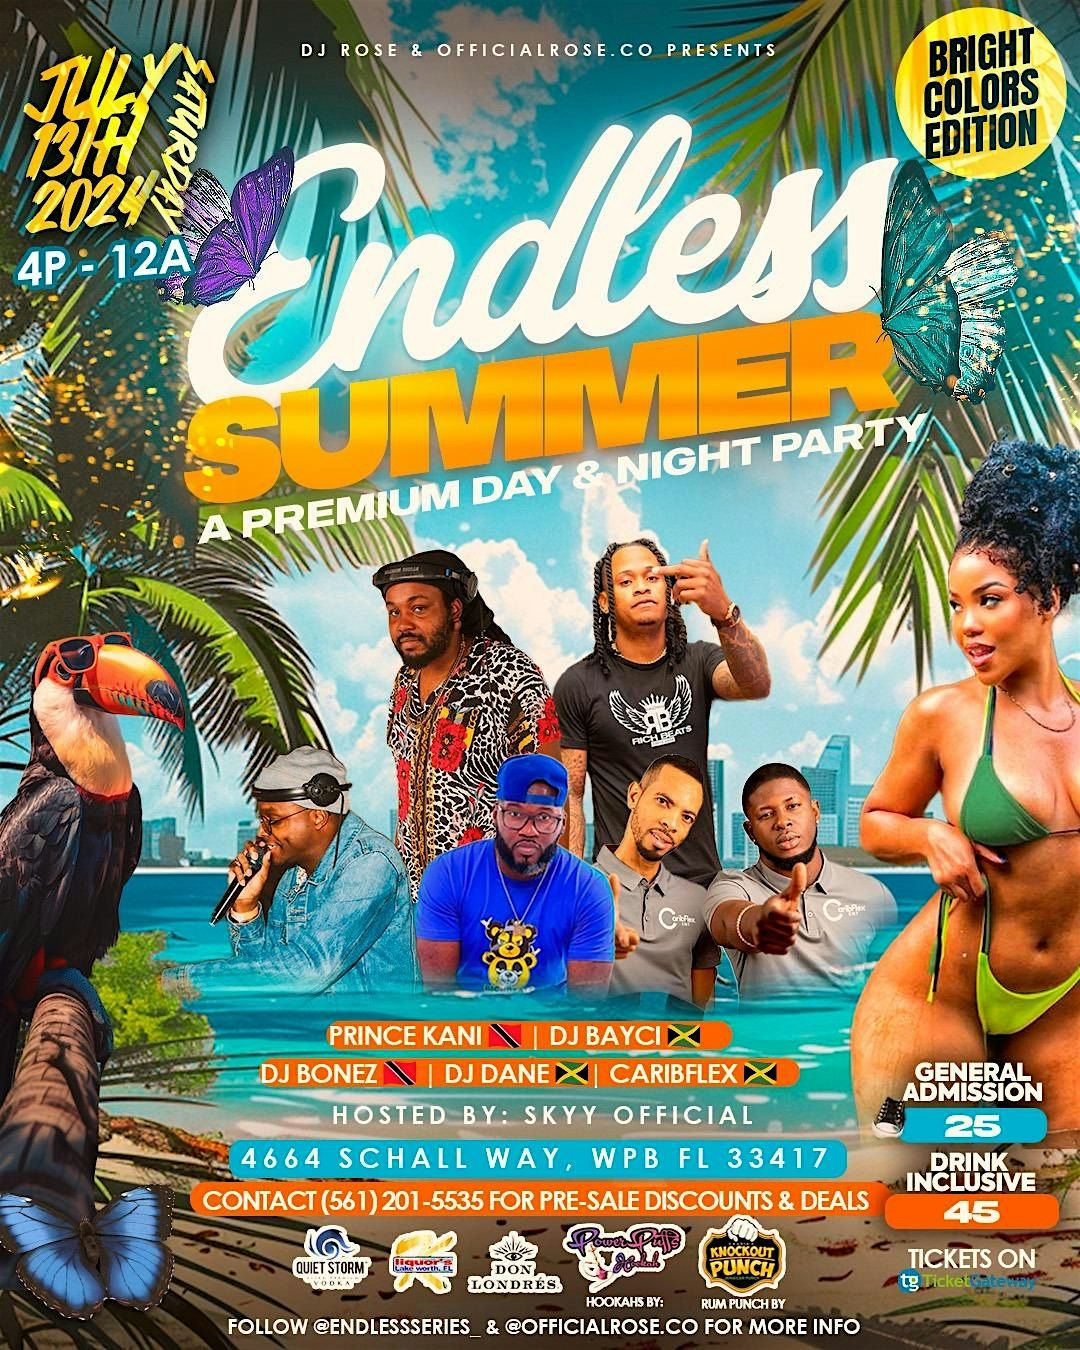 Endless Summer: A Premium Day Party